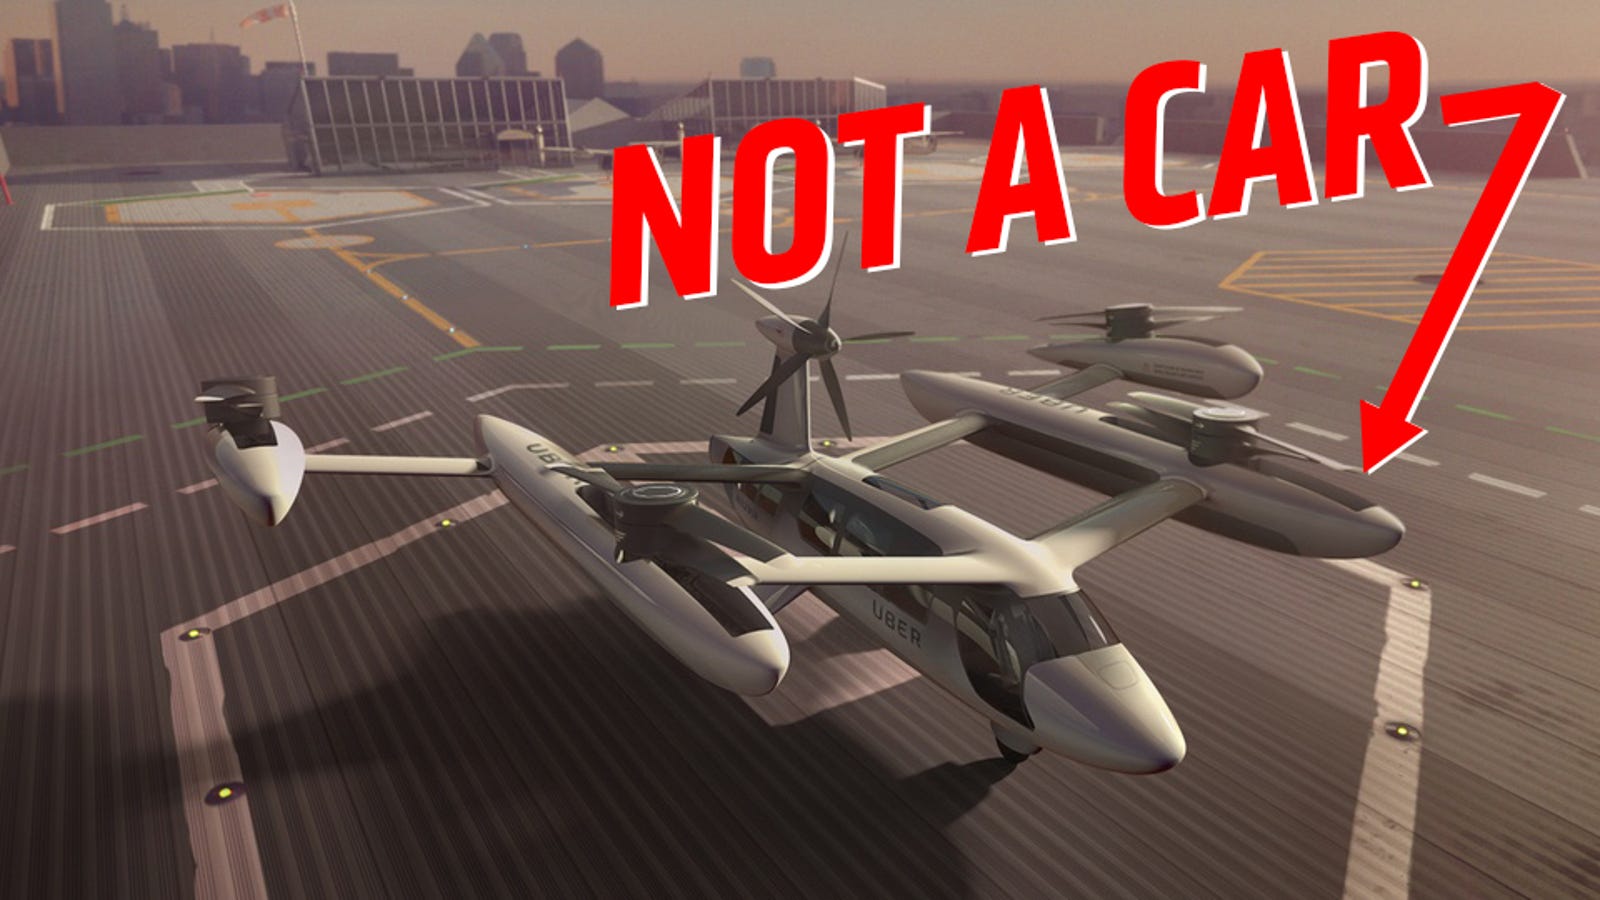 There Is No Such Thing As A Flying Car